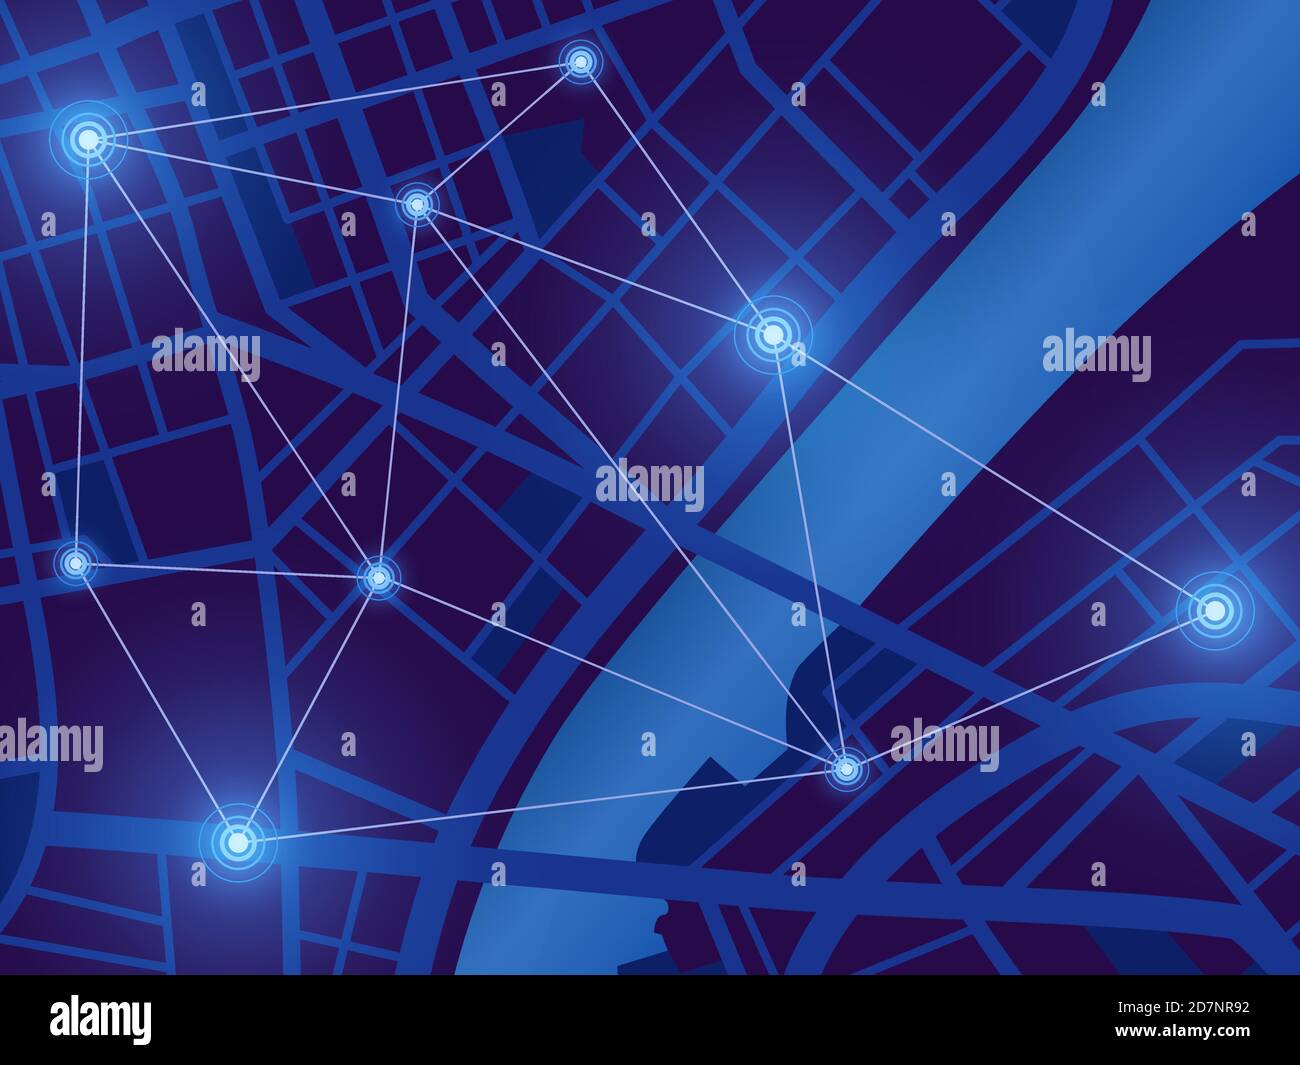 Futuristic city map. Gps location monitor. Top view digital night city. Navigation technology vector background. Illustration of city location, urban navigation street, route and roadmap Stock Vector